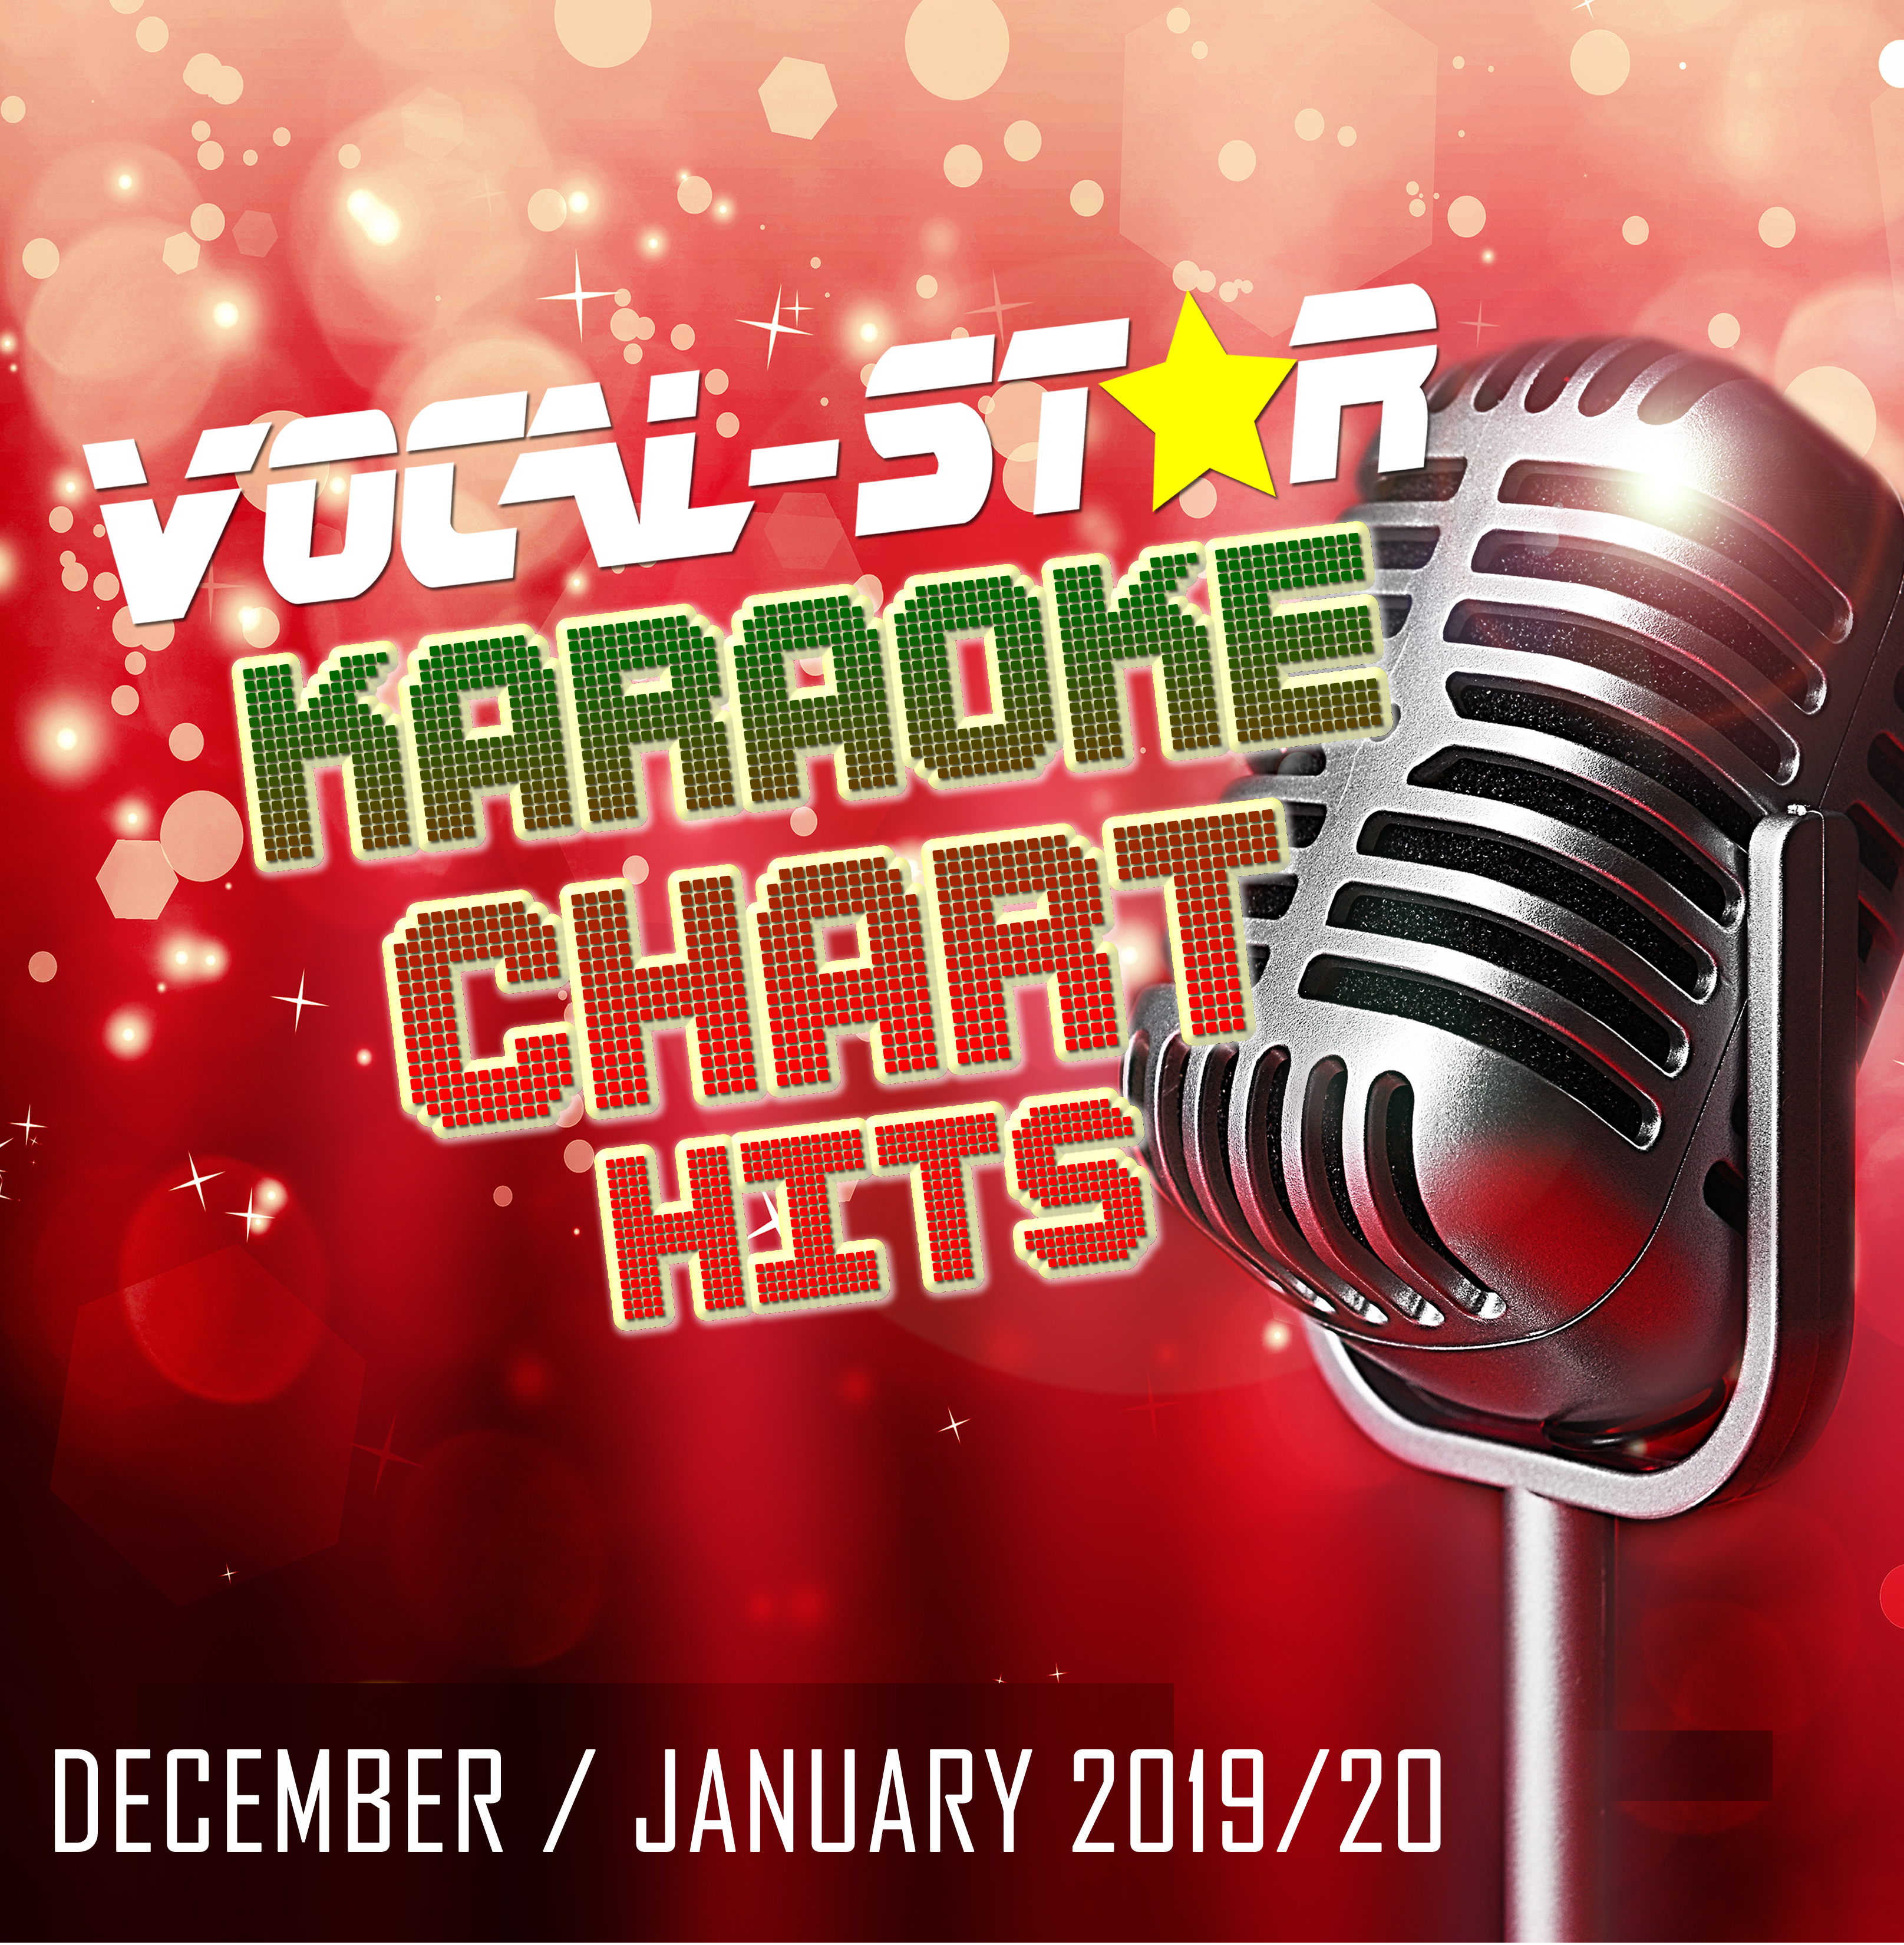 Vocal-Star VS34 Hits of December and January Digital Download